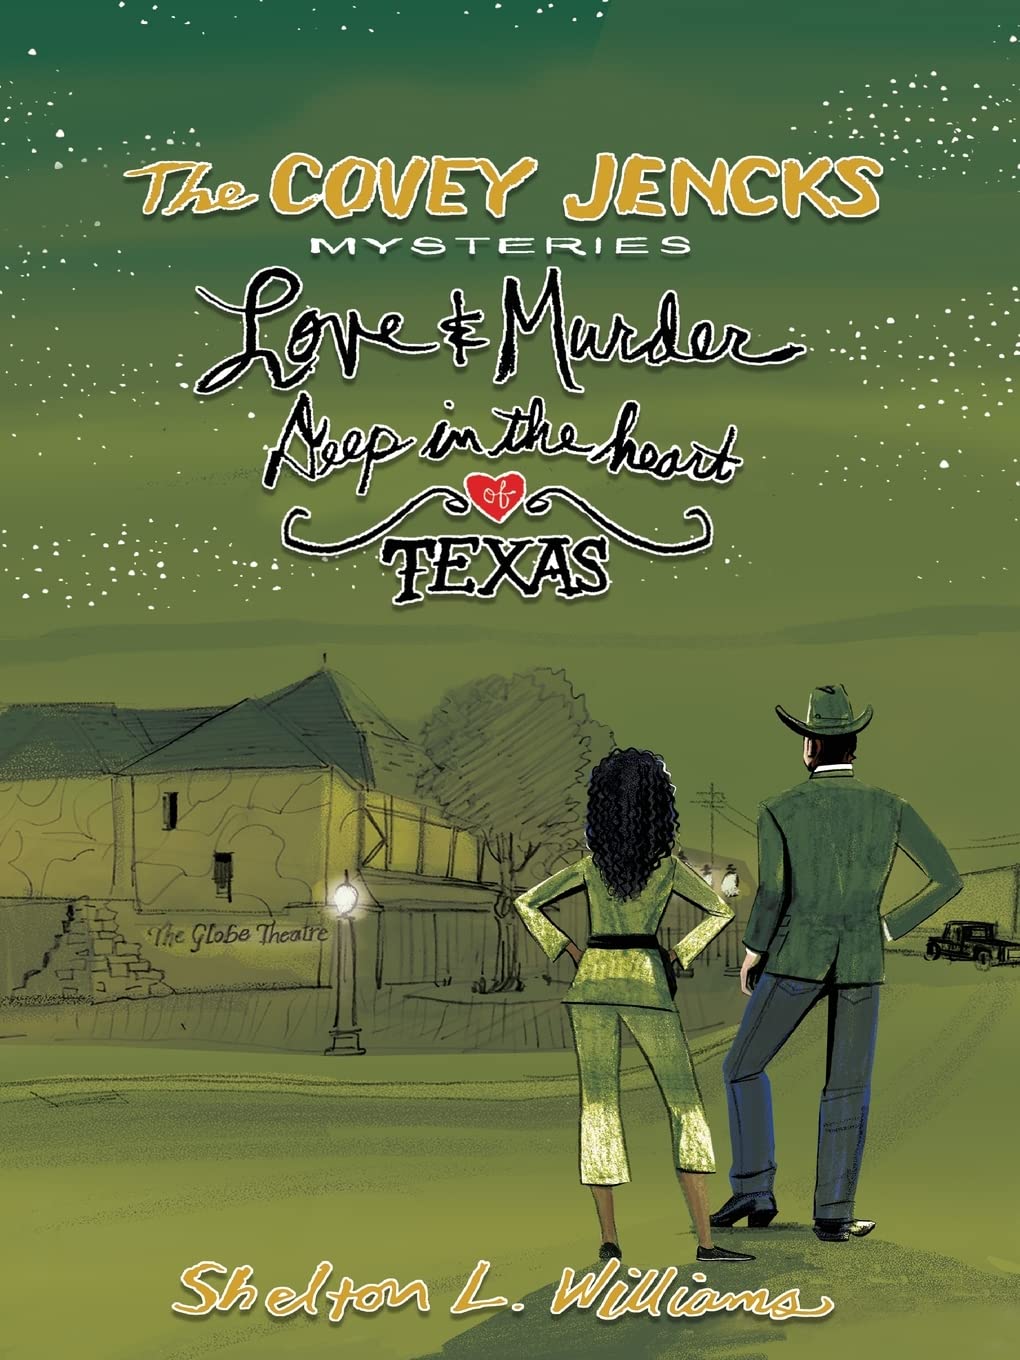 Amateur Detectives, Covey Jencks And JayJay Qualls, Are Back For another Adventure in another Covey Jencks Murder Mystery